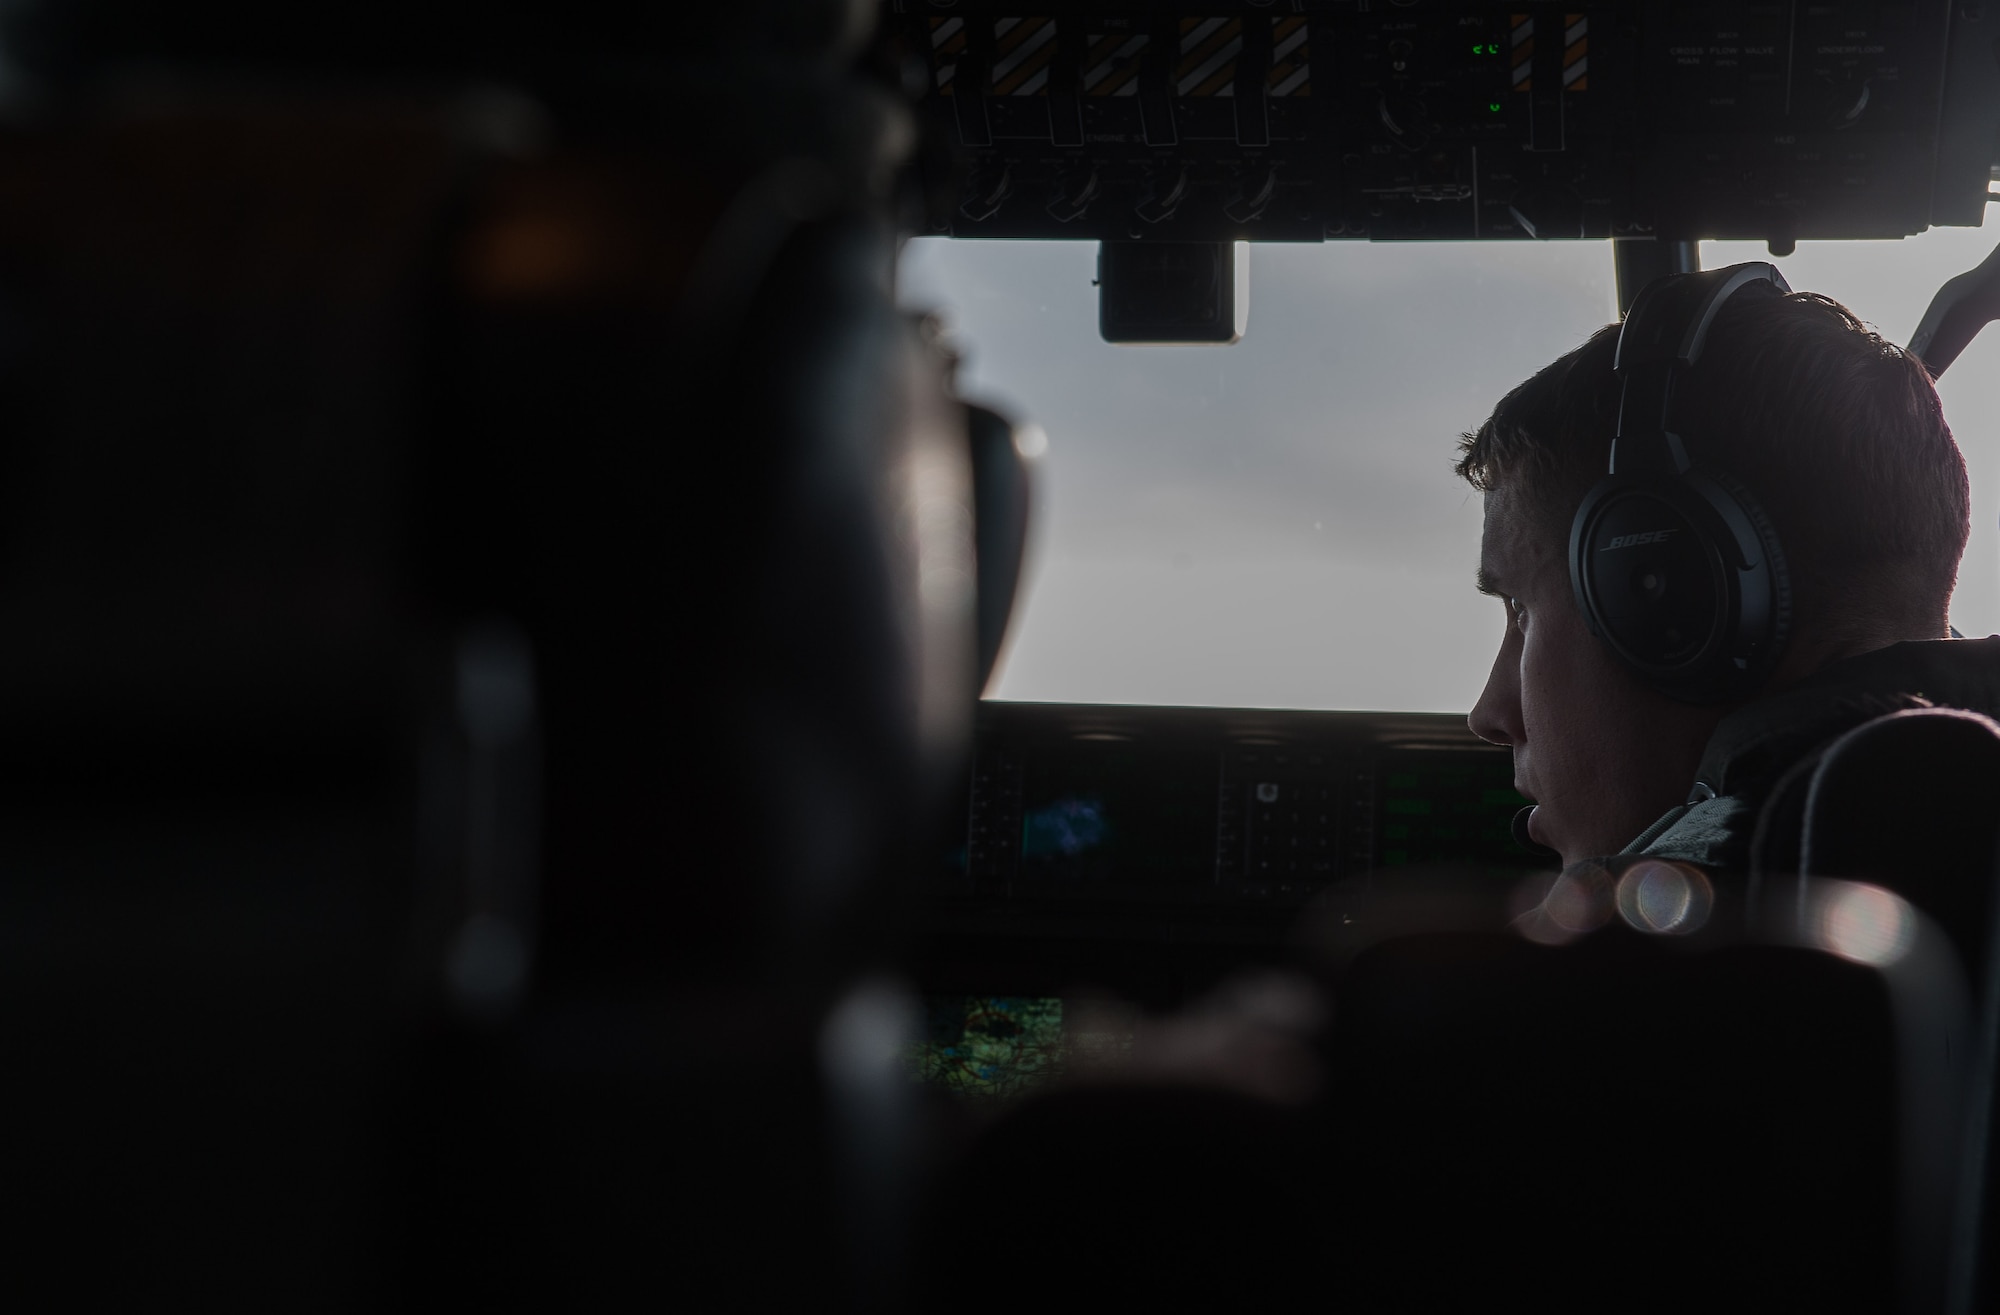 First Lieutenant Thomas Arnett, 37th Airlift Squadron pilot, copilots a C-130J Super Hercules during his unit’s 75th anniversary flight over Germany Feb. 10, 2017. Pilots have been flying with the 37th since February 1942, when the unit was activated as the 37th Transport Squadron. Since then, the unit has relocated nine times, the most recent being here with the 86th Operations Group since October 1994. (U.S. Air Force photo by Senior Airman Lane T. Plummer)